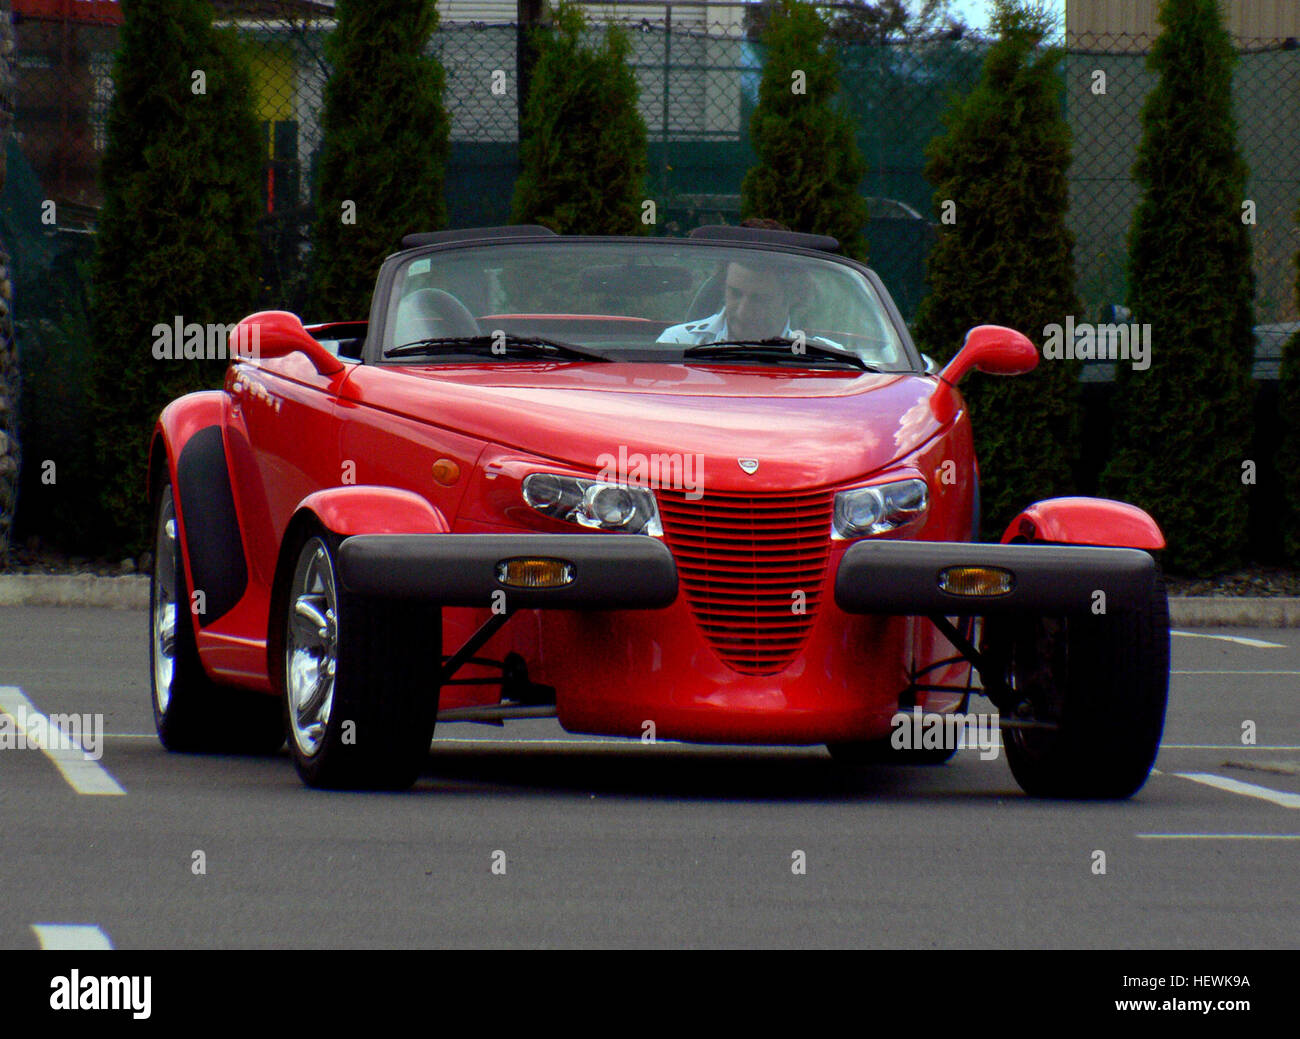 The Plymouth Prowler, later the Chrysler Prowler, is a &quot;retro&quot; styled production car built in 1997 and 1999-2002. The Prowler was based on the 1993 concept car of the same name.The design of the Prowler was said to have been inspired after Chrysler engineers were given free rein to create whatever they wanted in a &quot;hot rod&quot; or &quot;sportster&quot; type vehicle. One of the most striking design features of the Prowler are the open, Indy racer style front wheels. Stock Photo